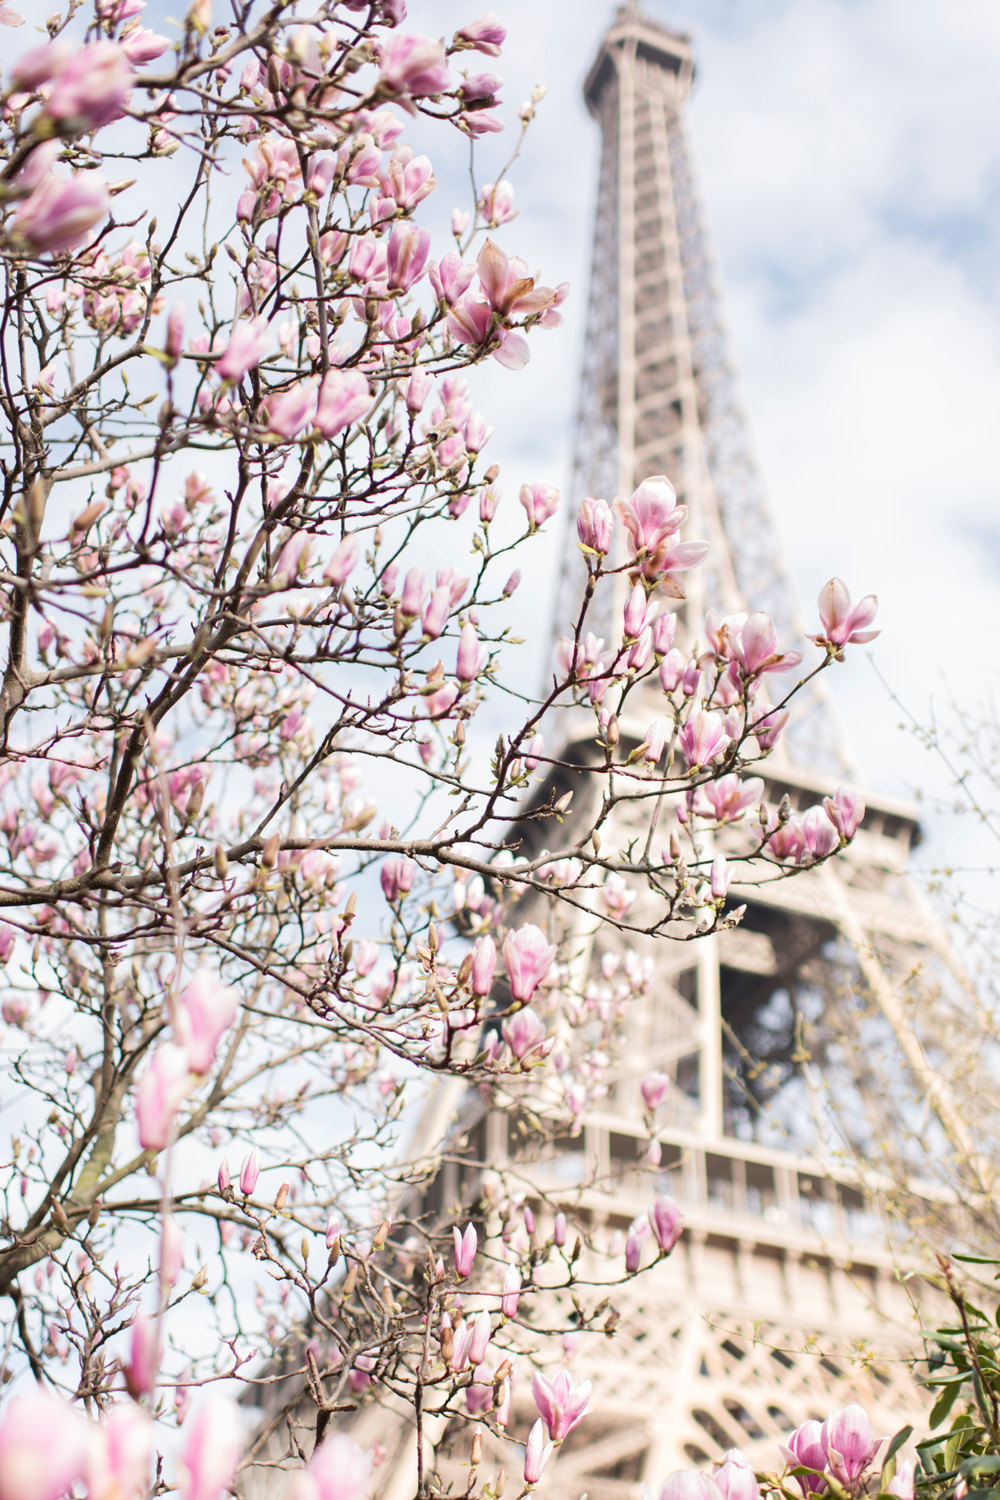 Copy of Copy of The Eiffel Tower and Magnolia Tree